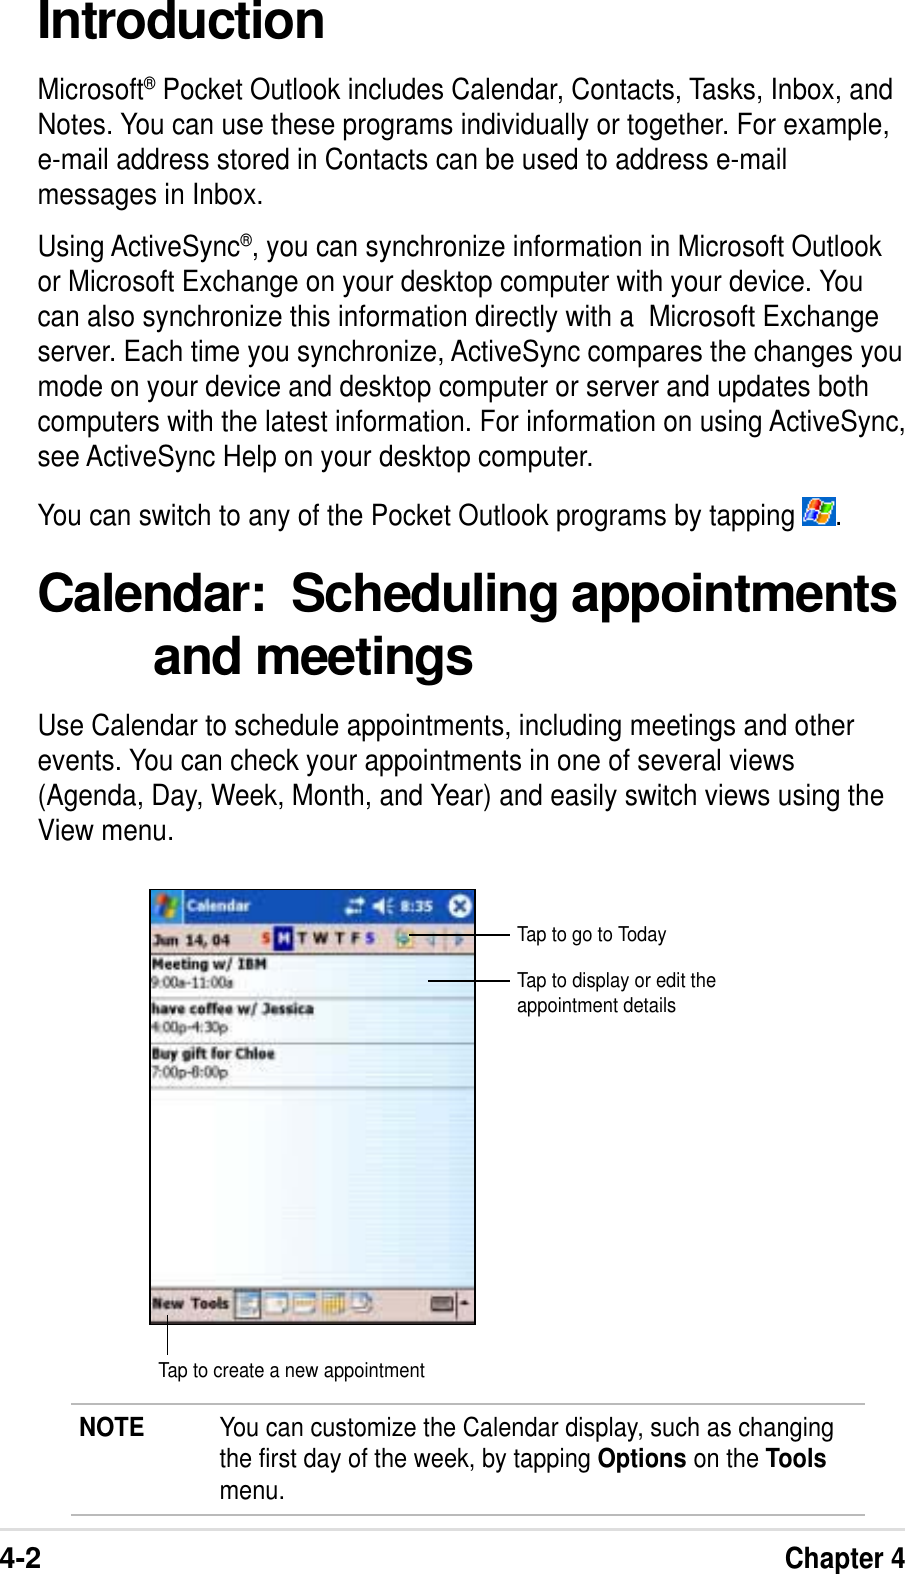 4-2Chapter 4IntroductionMicrosoft® Pocket Outlook includes Calendar, Contacts, Tasks, Inbox, andNotes. You can use these programs individually or together. For example,e-mail address stored in Contacts can be used to address e-mailmessages in Inbox.Using ActiveSync®, you can synchronize information in Microsoft Outlookor Microsoft Exchange on your desktop computer with your device. Youcan also synchronize this information directly with a  Microsoft Exchangeserver. Each time you synchronize, ActiveSync compares the changes youmode on your device and desktop computer or server and updates bothcomputers with the latest information. For information on using ActiveSync,see ActiveSync Help on your desktop computer.You can switch to any of the Pocket Outlook programs by tapping  .Calendar:  Scheduling appointmentsand meetingsUse Calendar to schedule appointments, including meetings and otherevents. You can check your appointments in one of several views(Agenda, Day, Week, Month, and Year) and easily switch views using theView menu.NOTE You can customize the Calendar display, such as changingthe first day of the week, by tapping Options on the Toolsmenu.Tap to go to TodayTap to display or edit theappointment detailsTap to create a new appointment